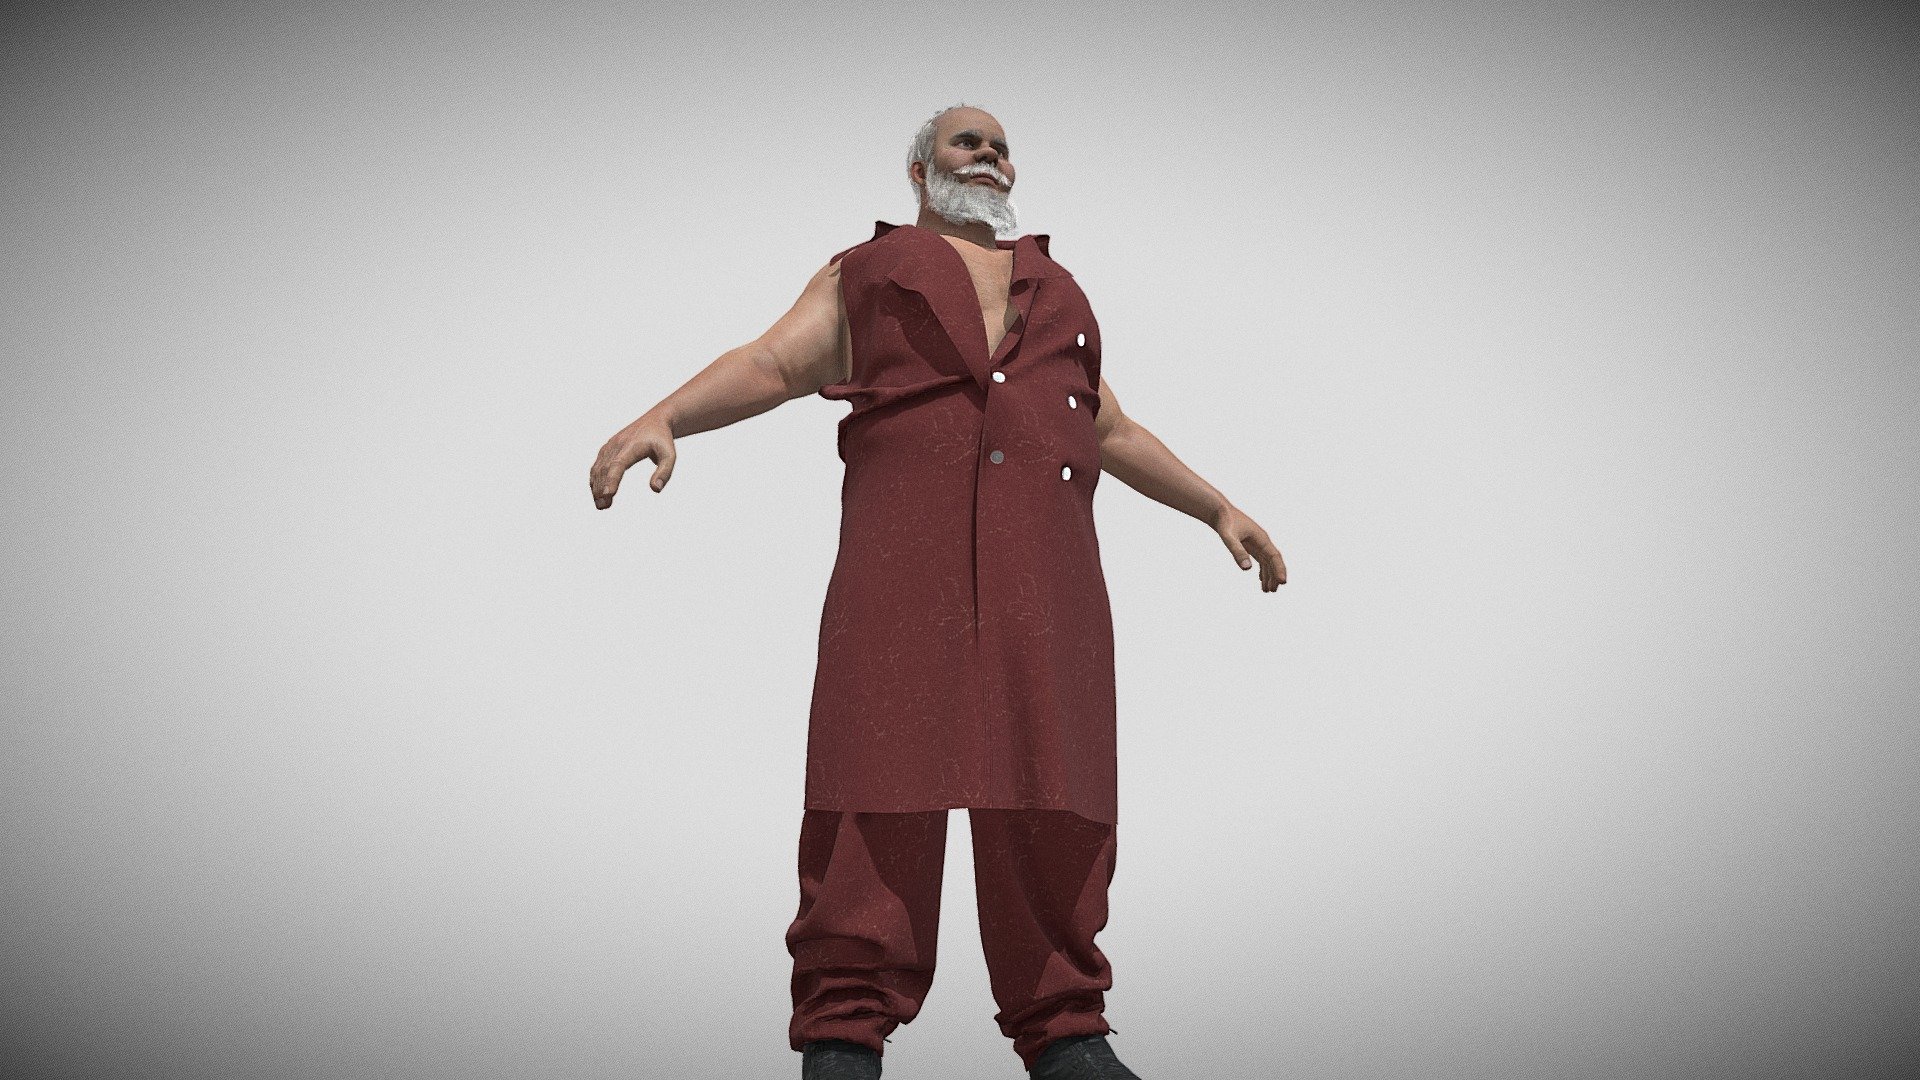 Santa Claus after a bad night. Fun character created for Christmas! - Santa after a bad night - 3D model by Marc Sawyer (@whitewashstudio) 3d model